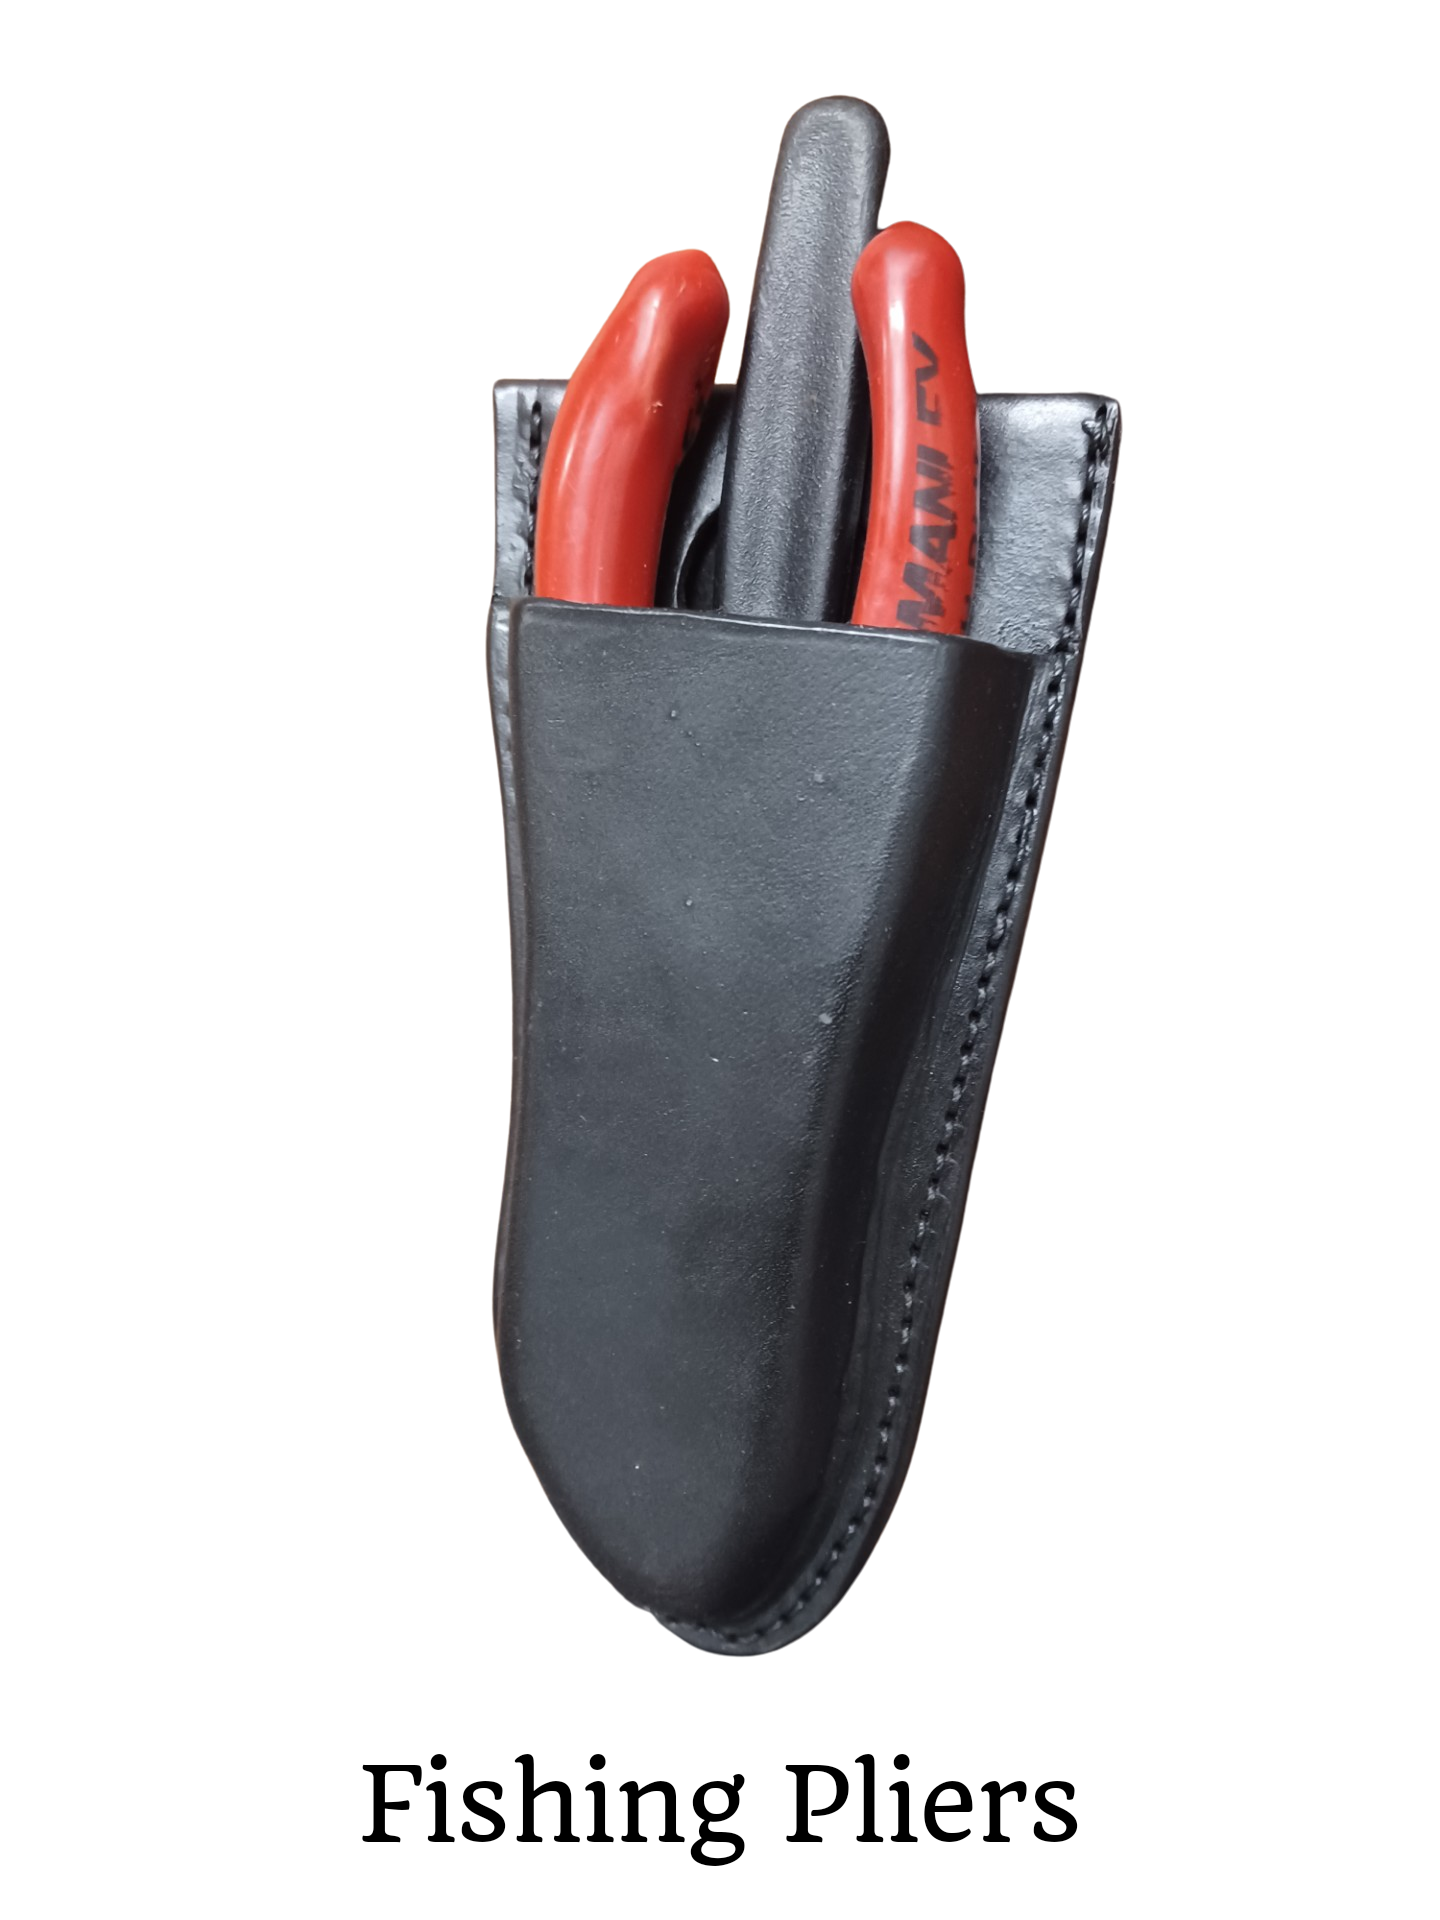 FISHING SHEATH FITS 5 MANLEY PLIERS LEATHER STAINLESS